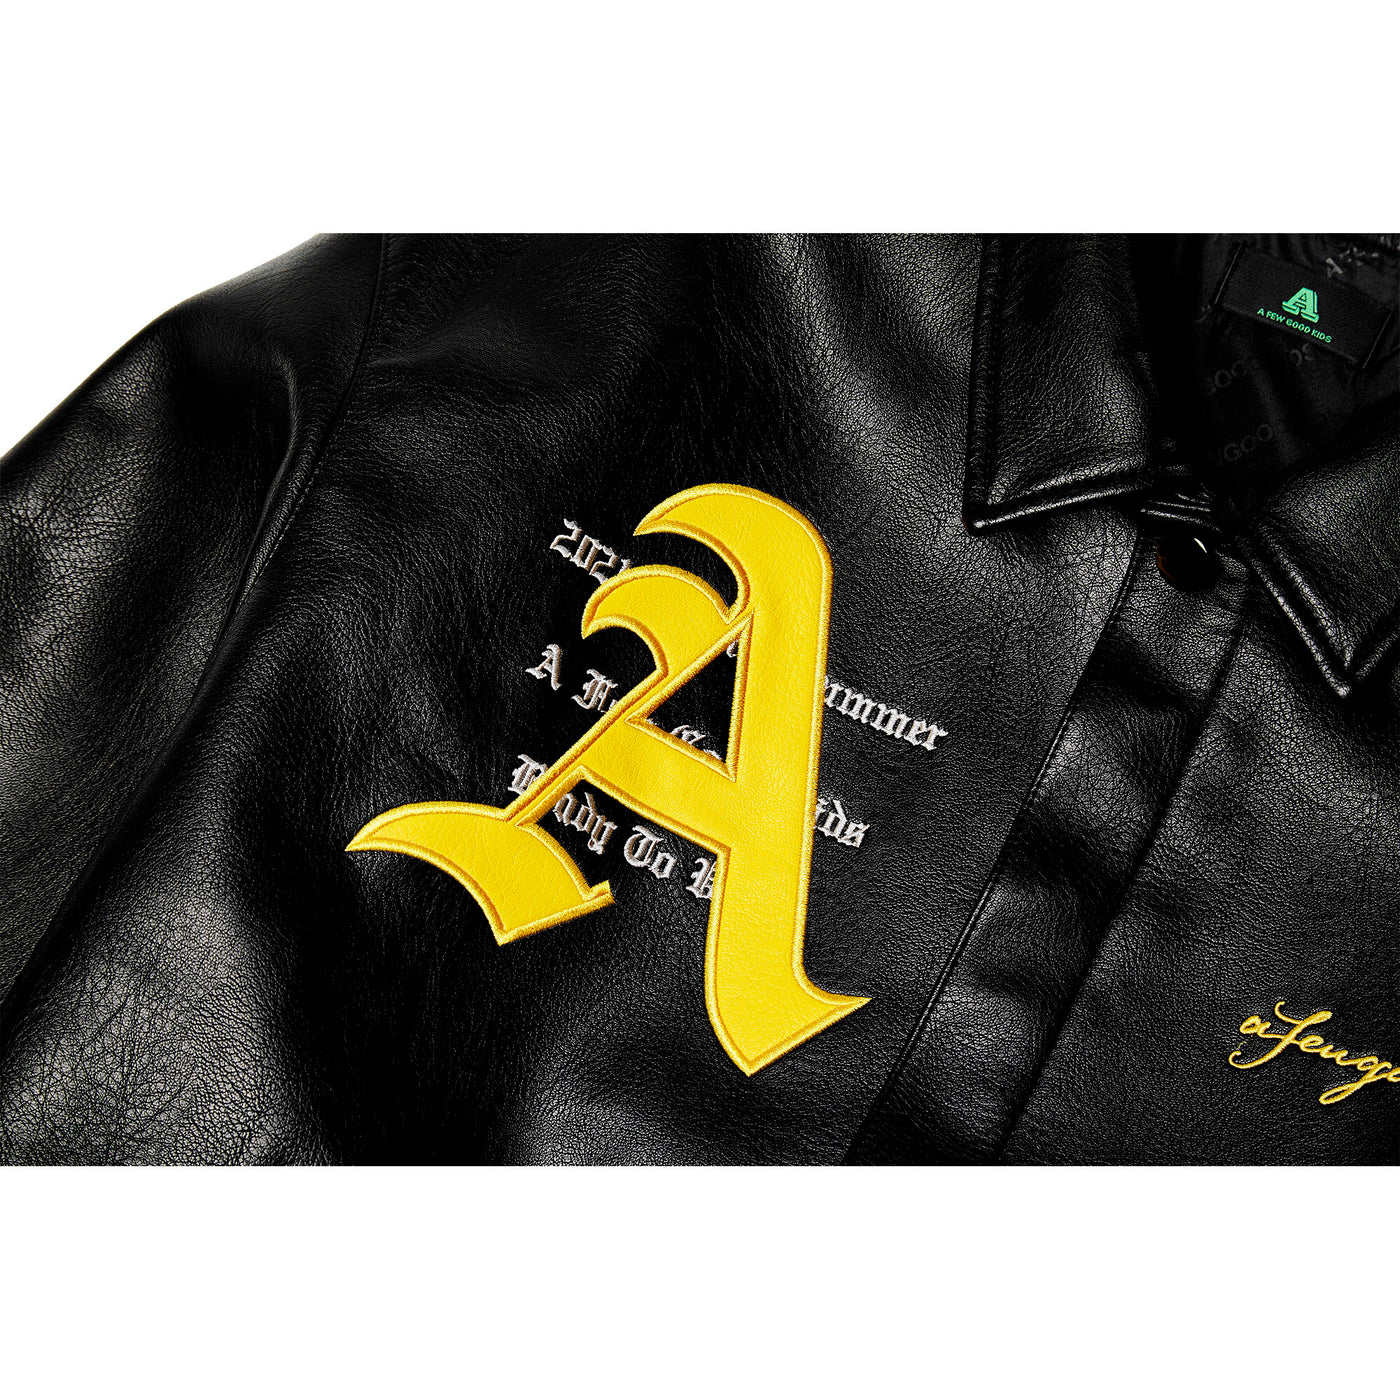 AFGK RACING LEATHER JACKET DONCARE - スタジャン